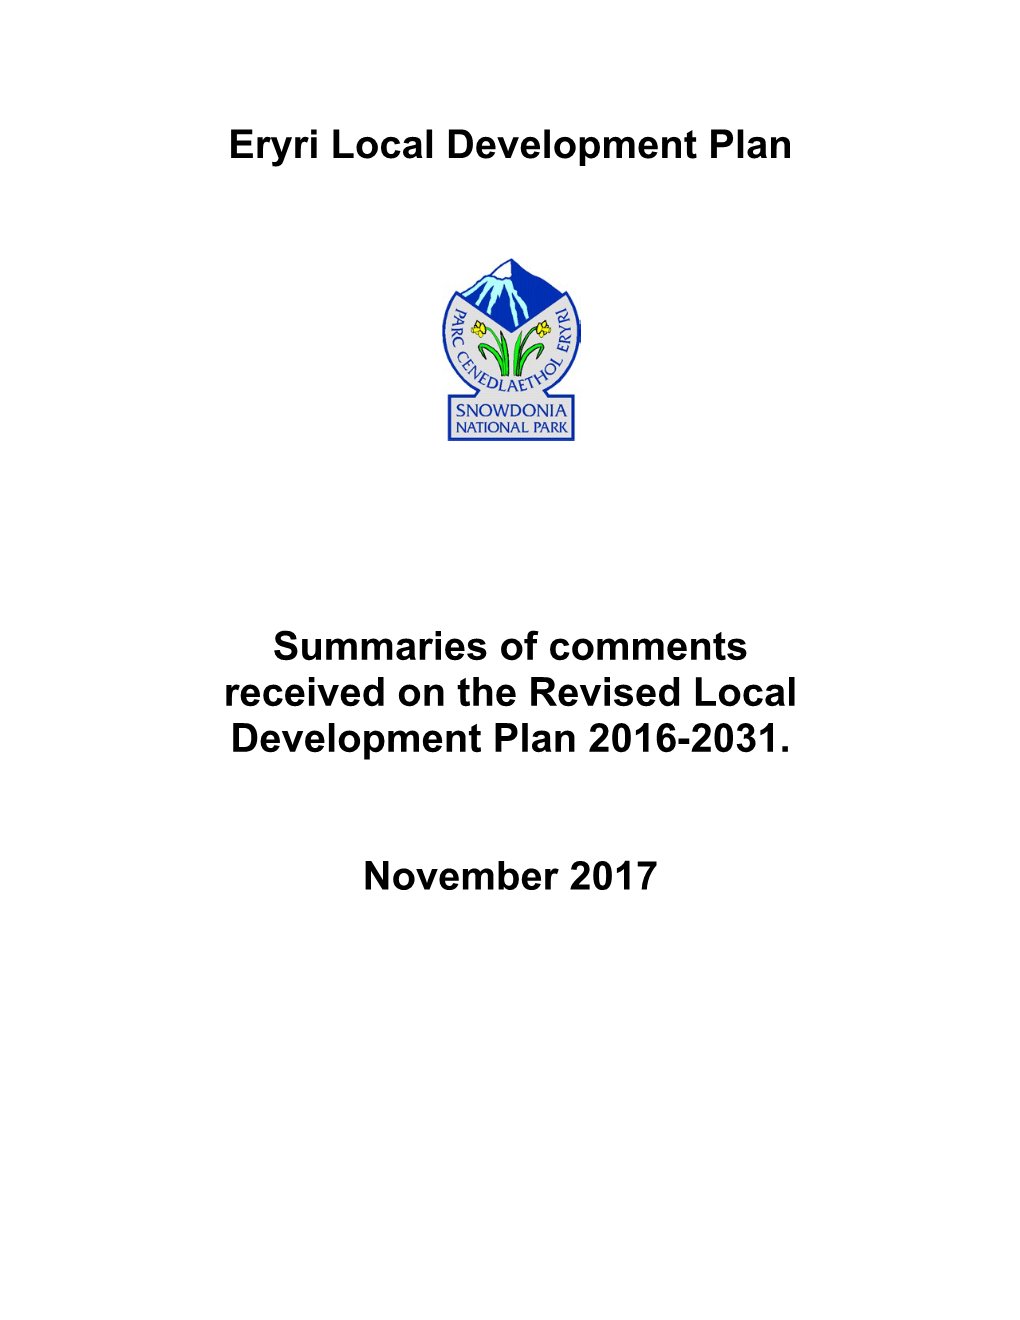 Summary of Comments Received on the Revised Local Development